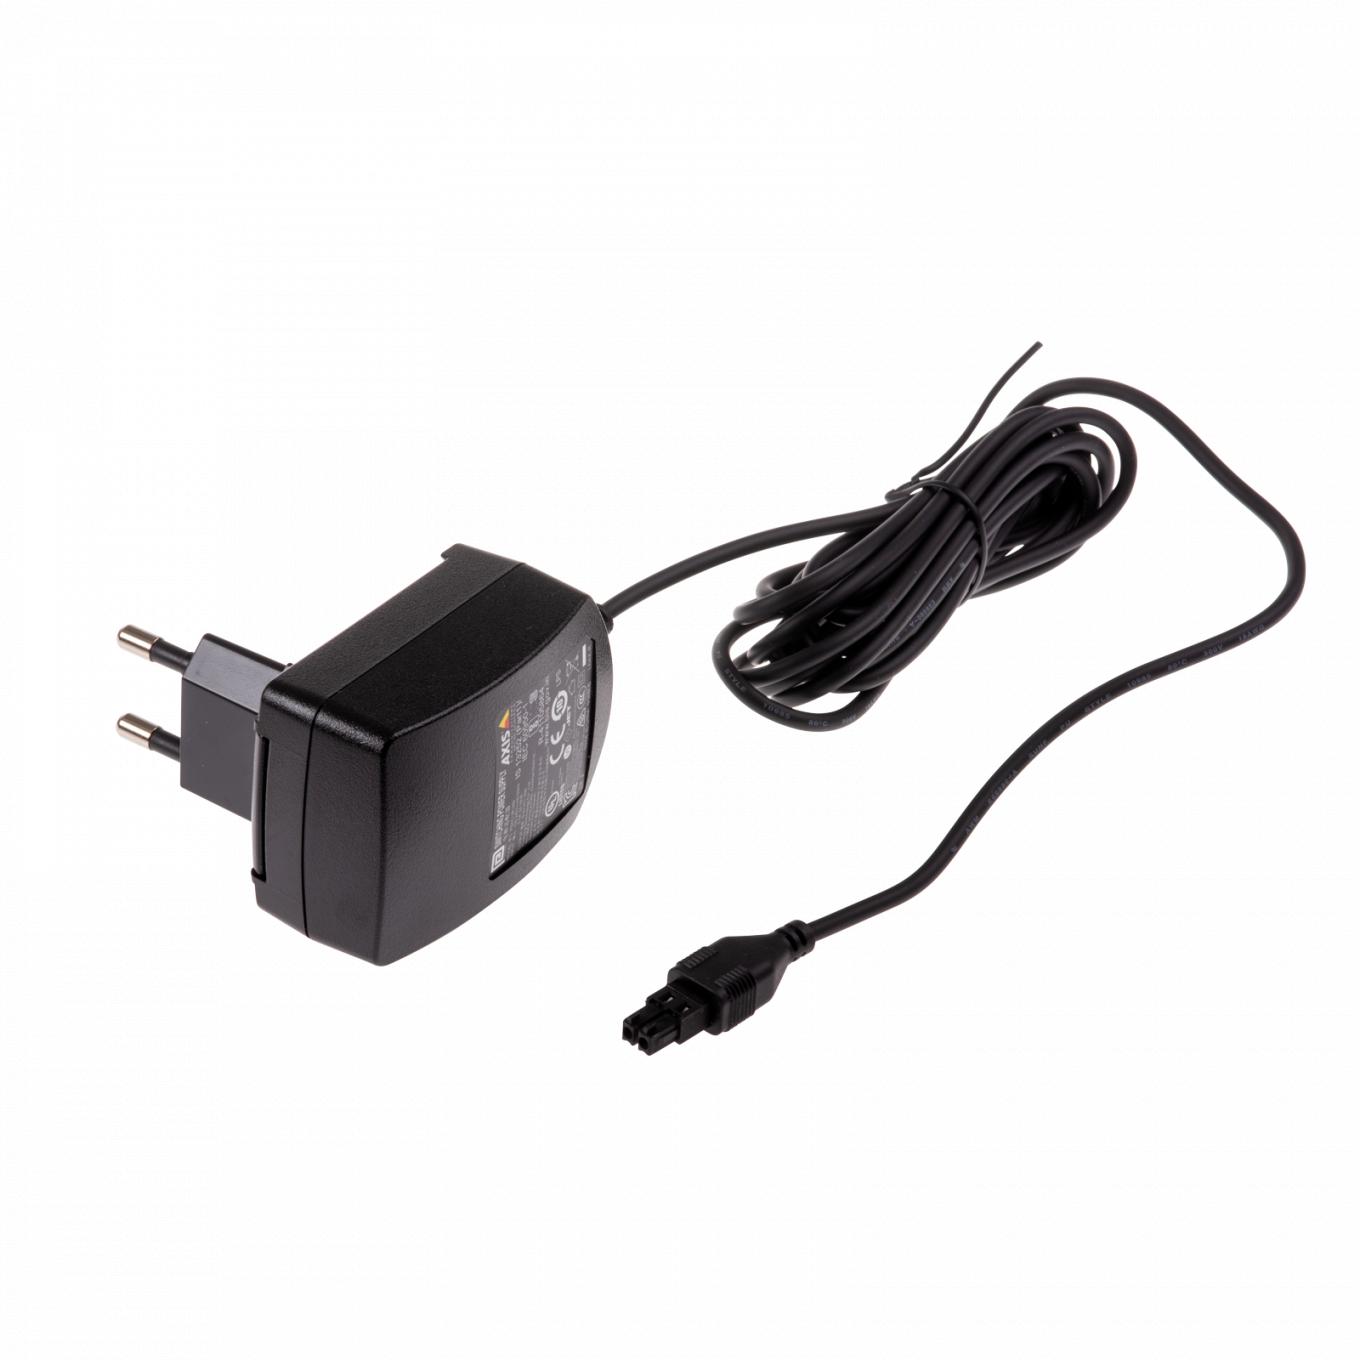 Power mains adapter PS-K T-C、左から見た図